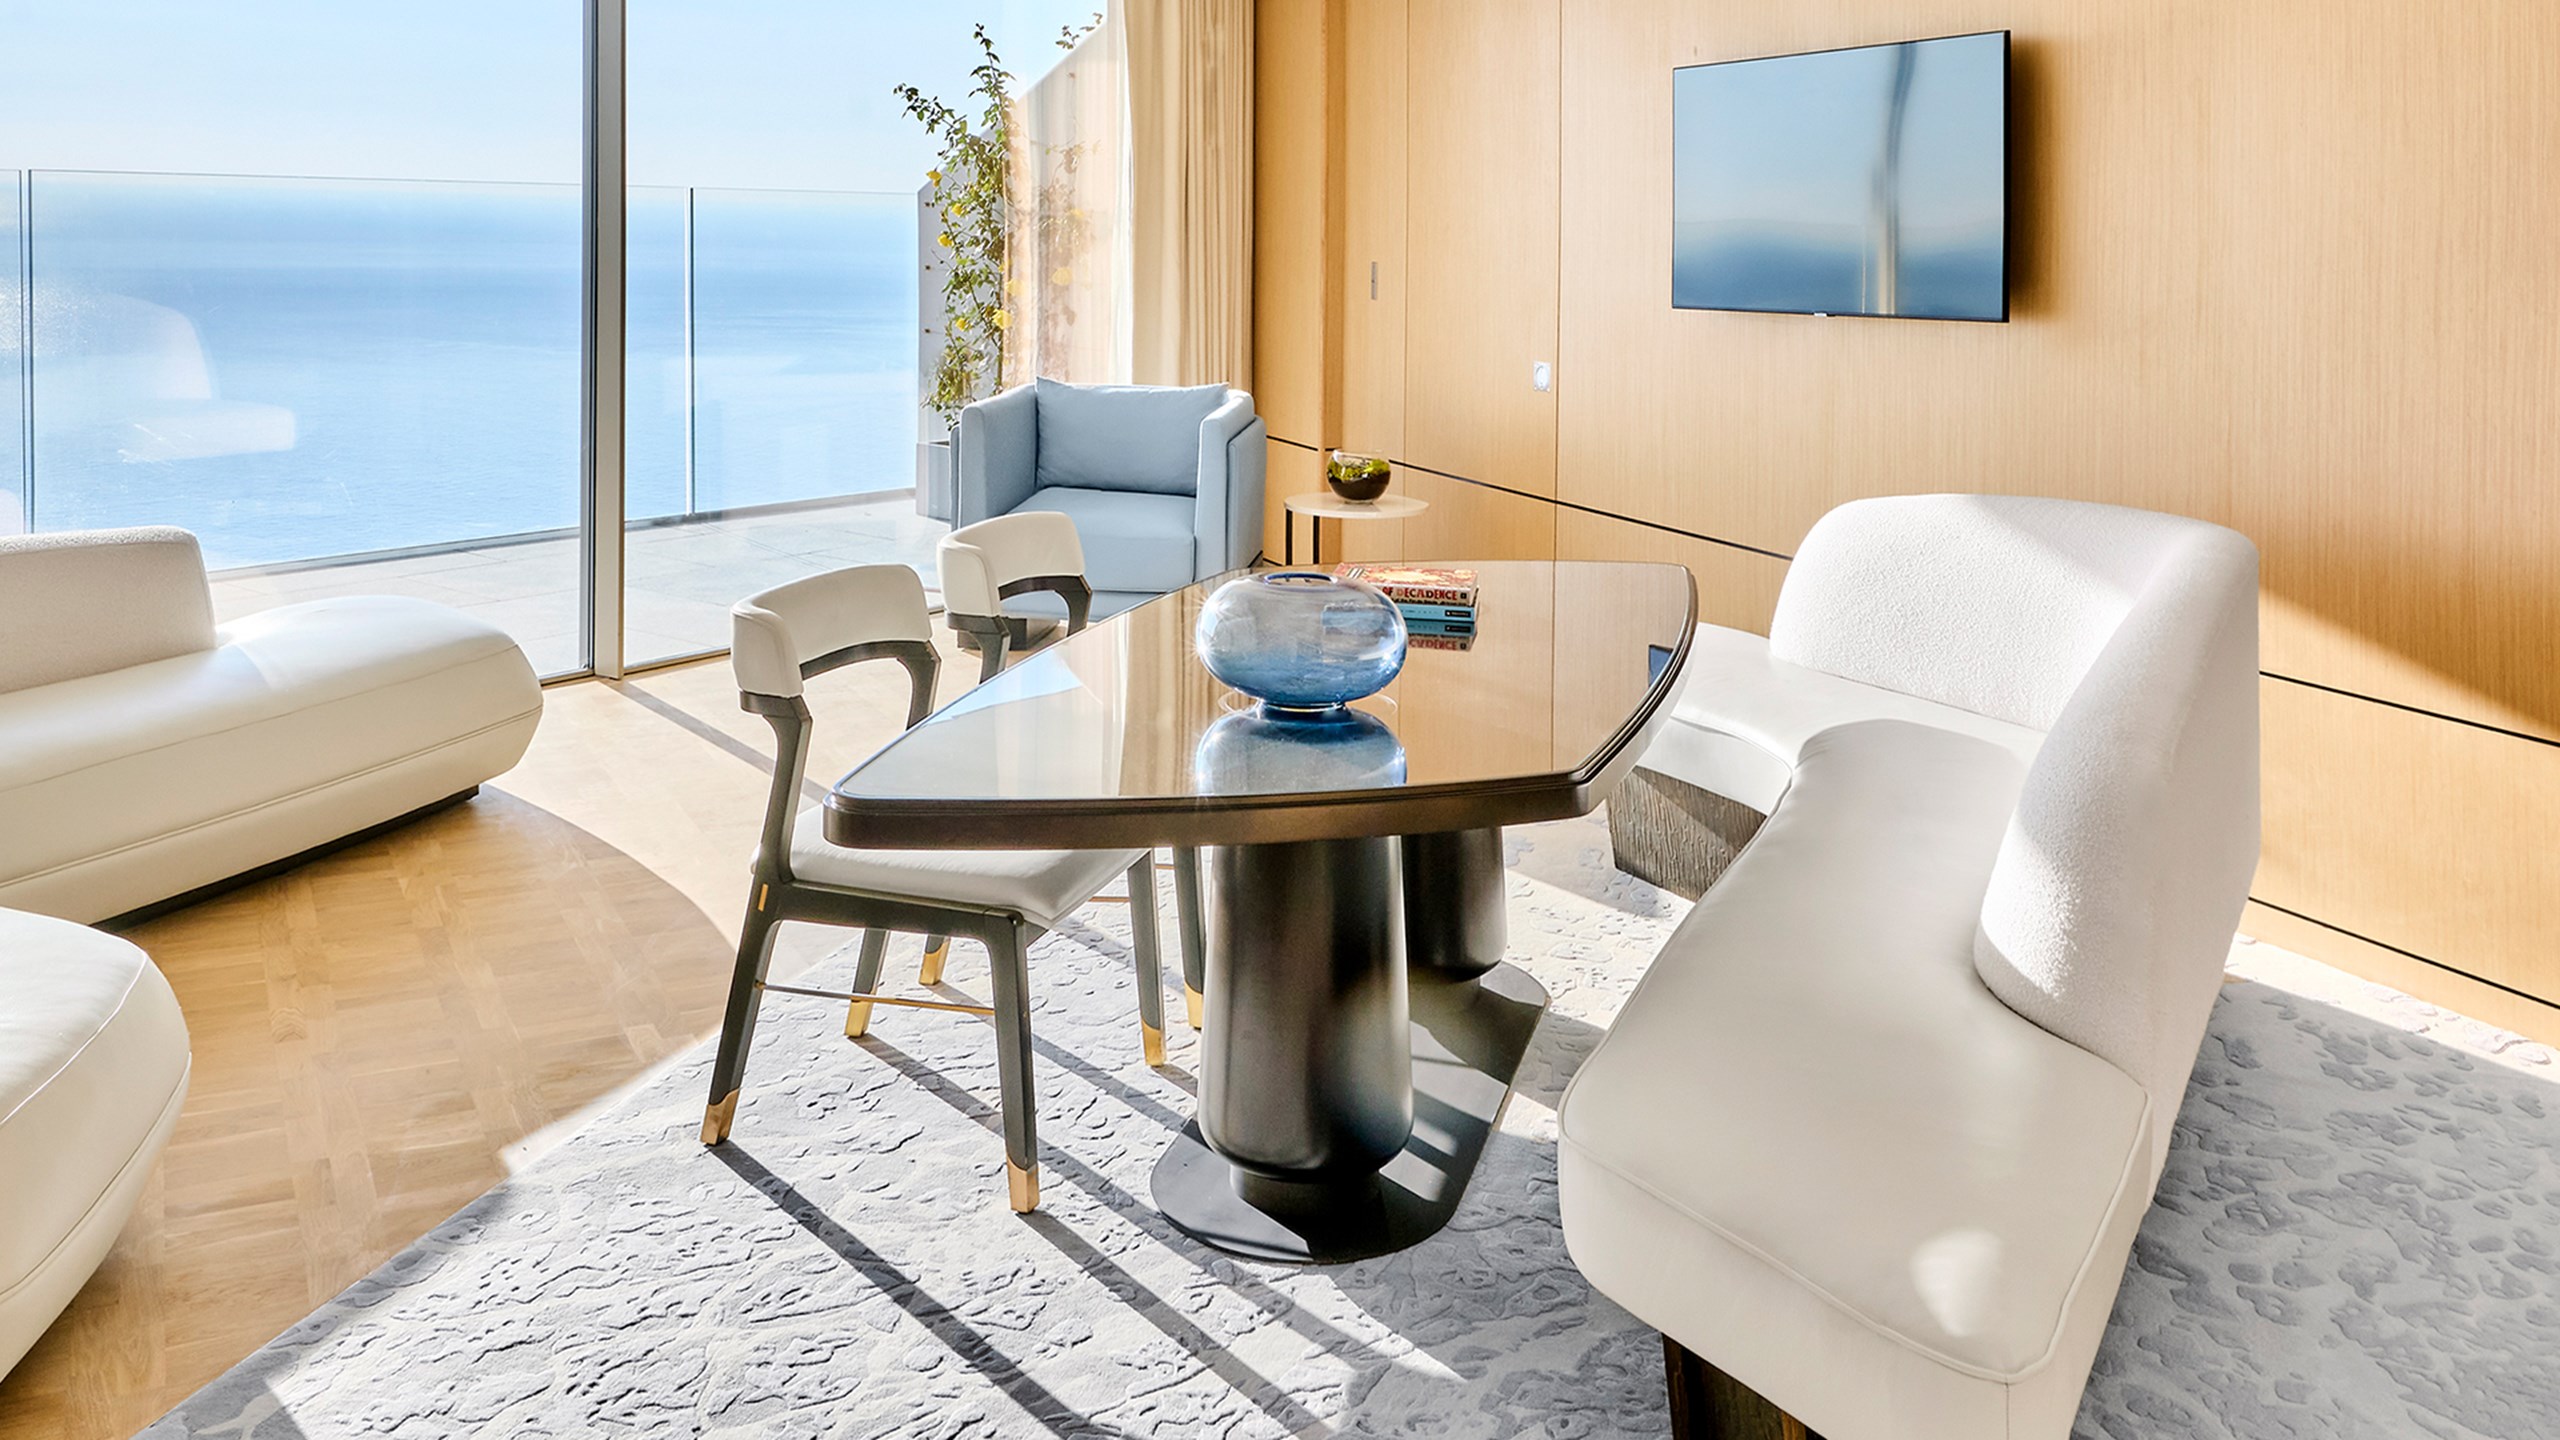 Riviera Suite - lounge with sofa, table and armchair and view on the sea.